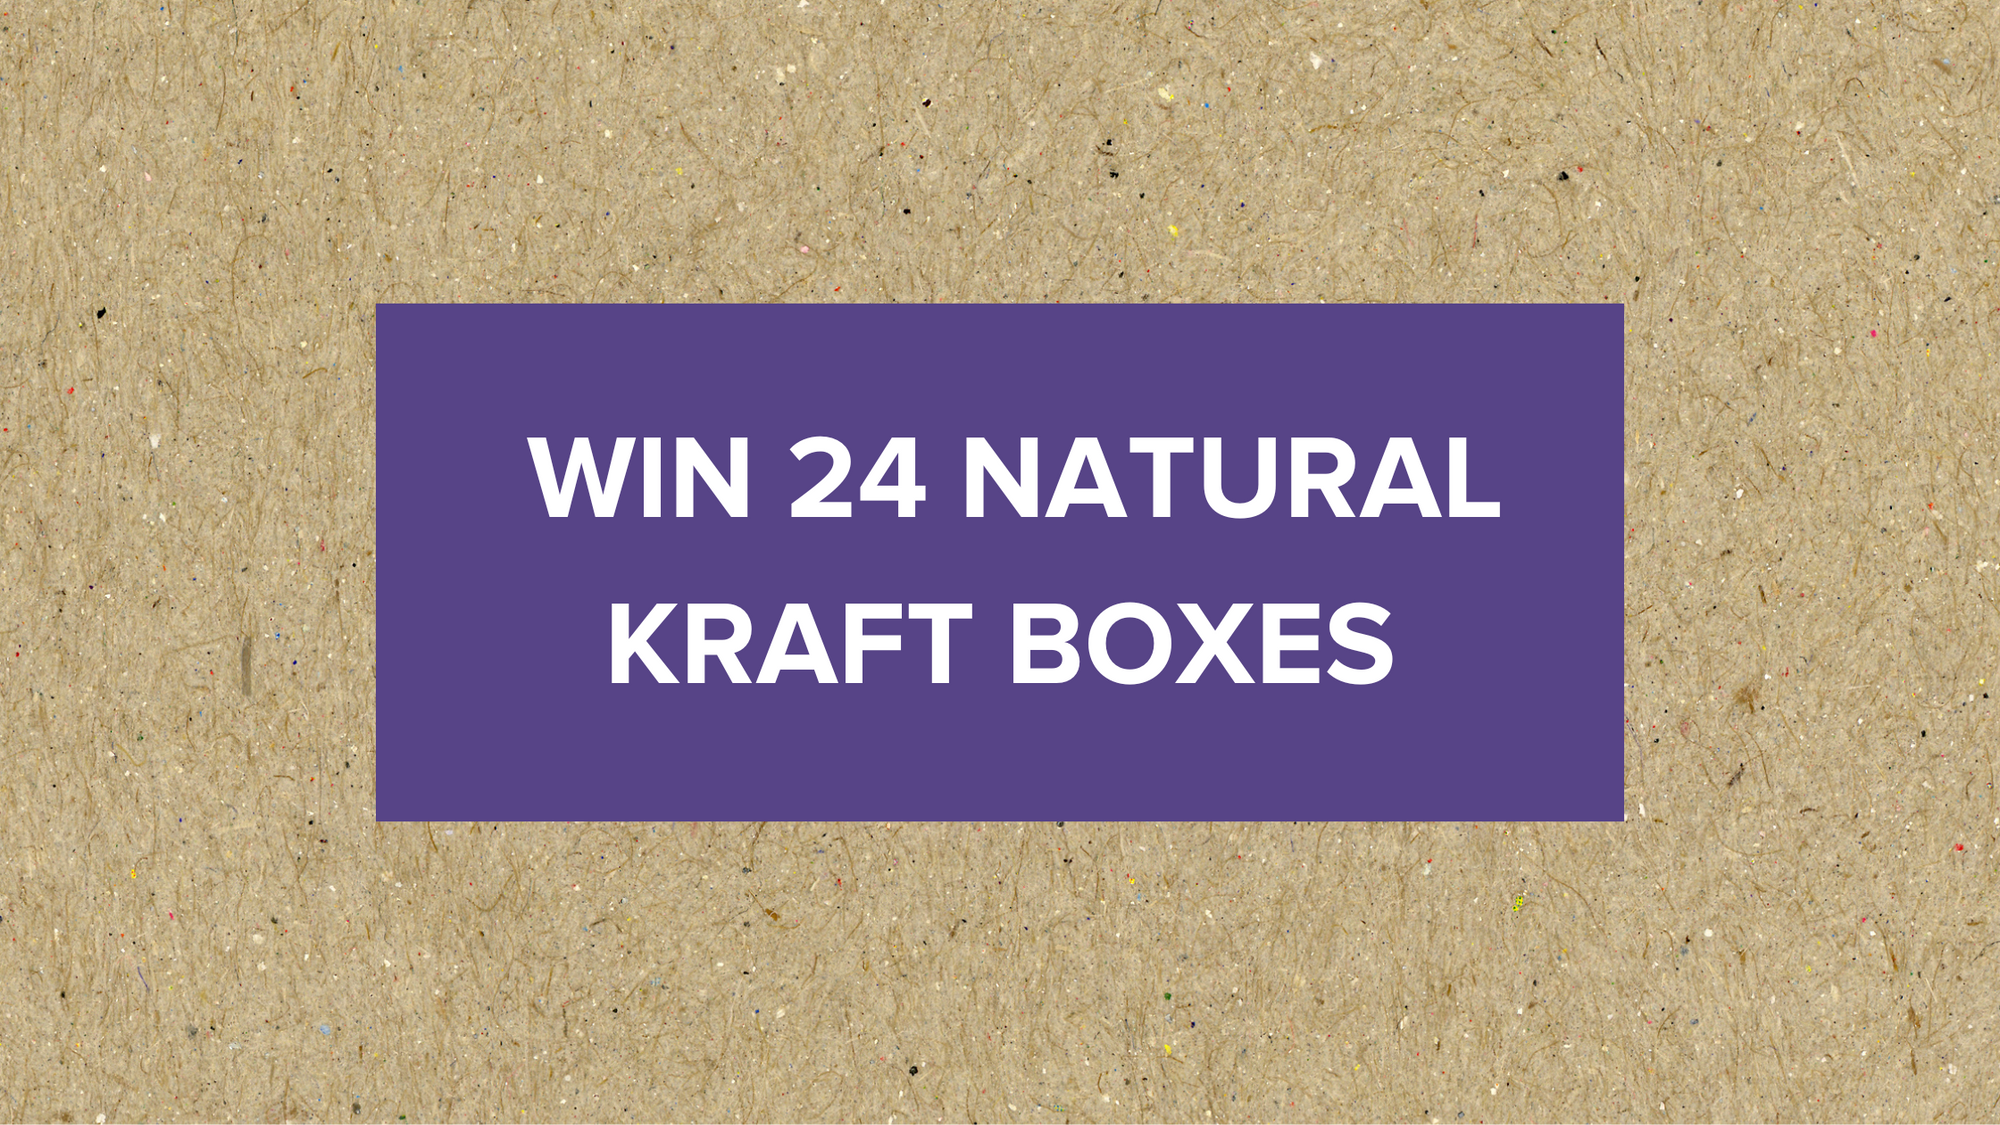 Stand a chance to win 24 Natural Kraft Boxes